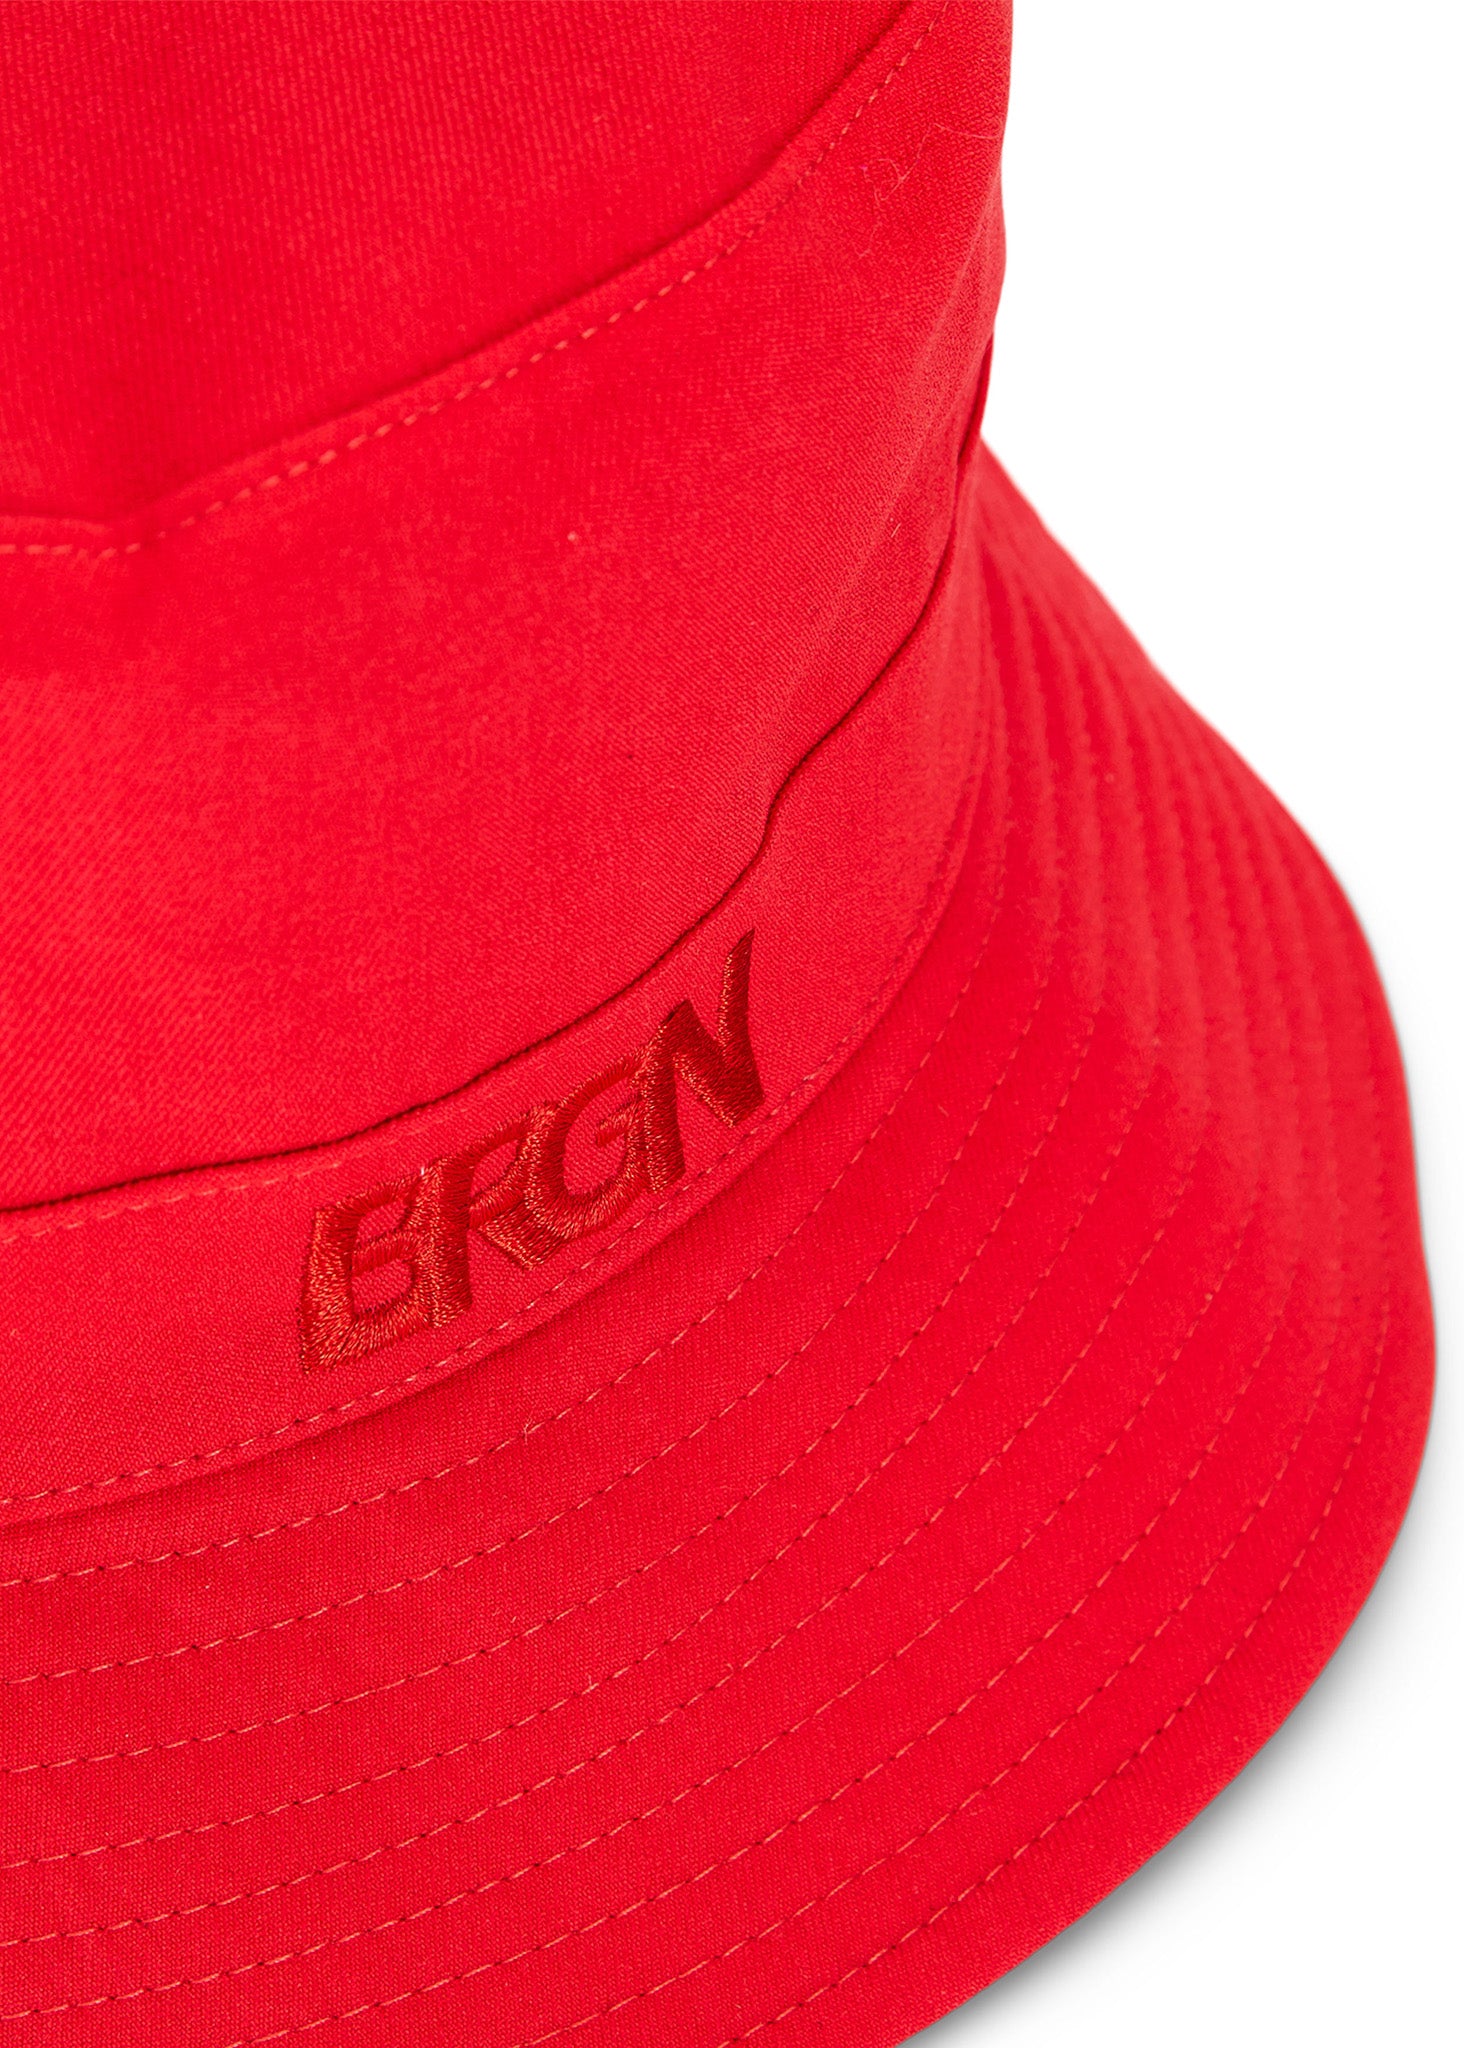 BRGN Bucket Accessories 385 Berry Red